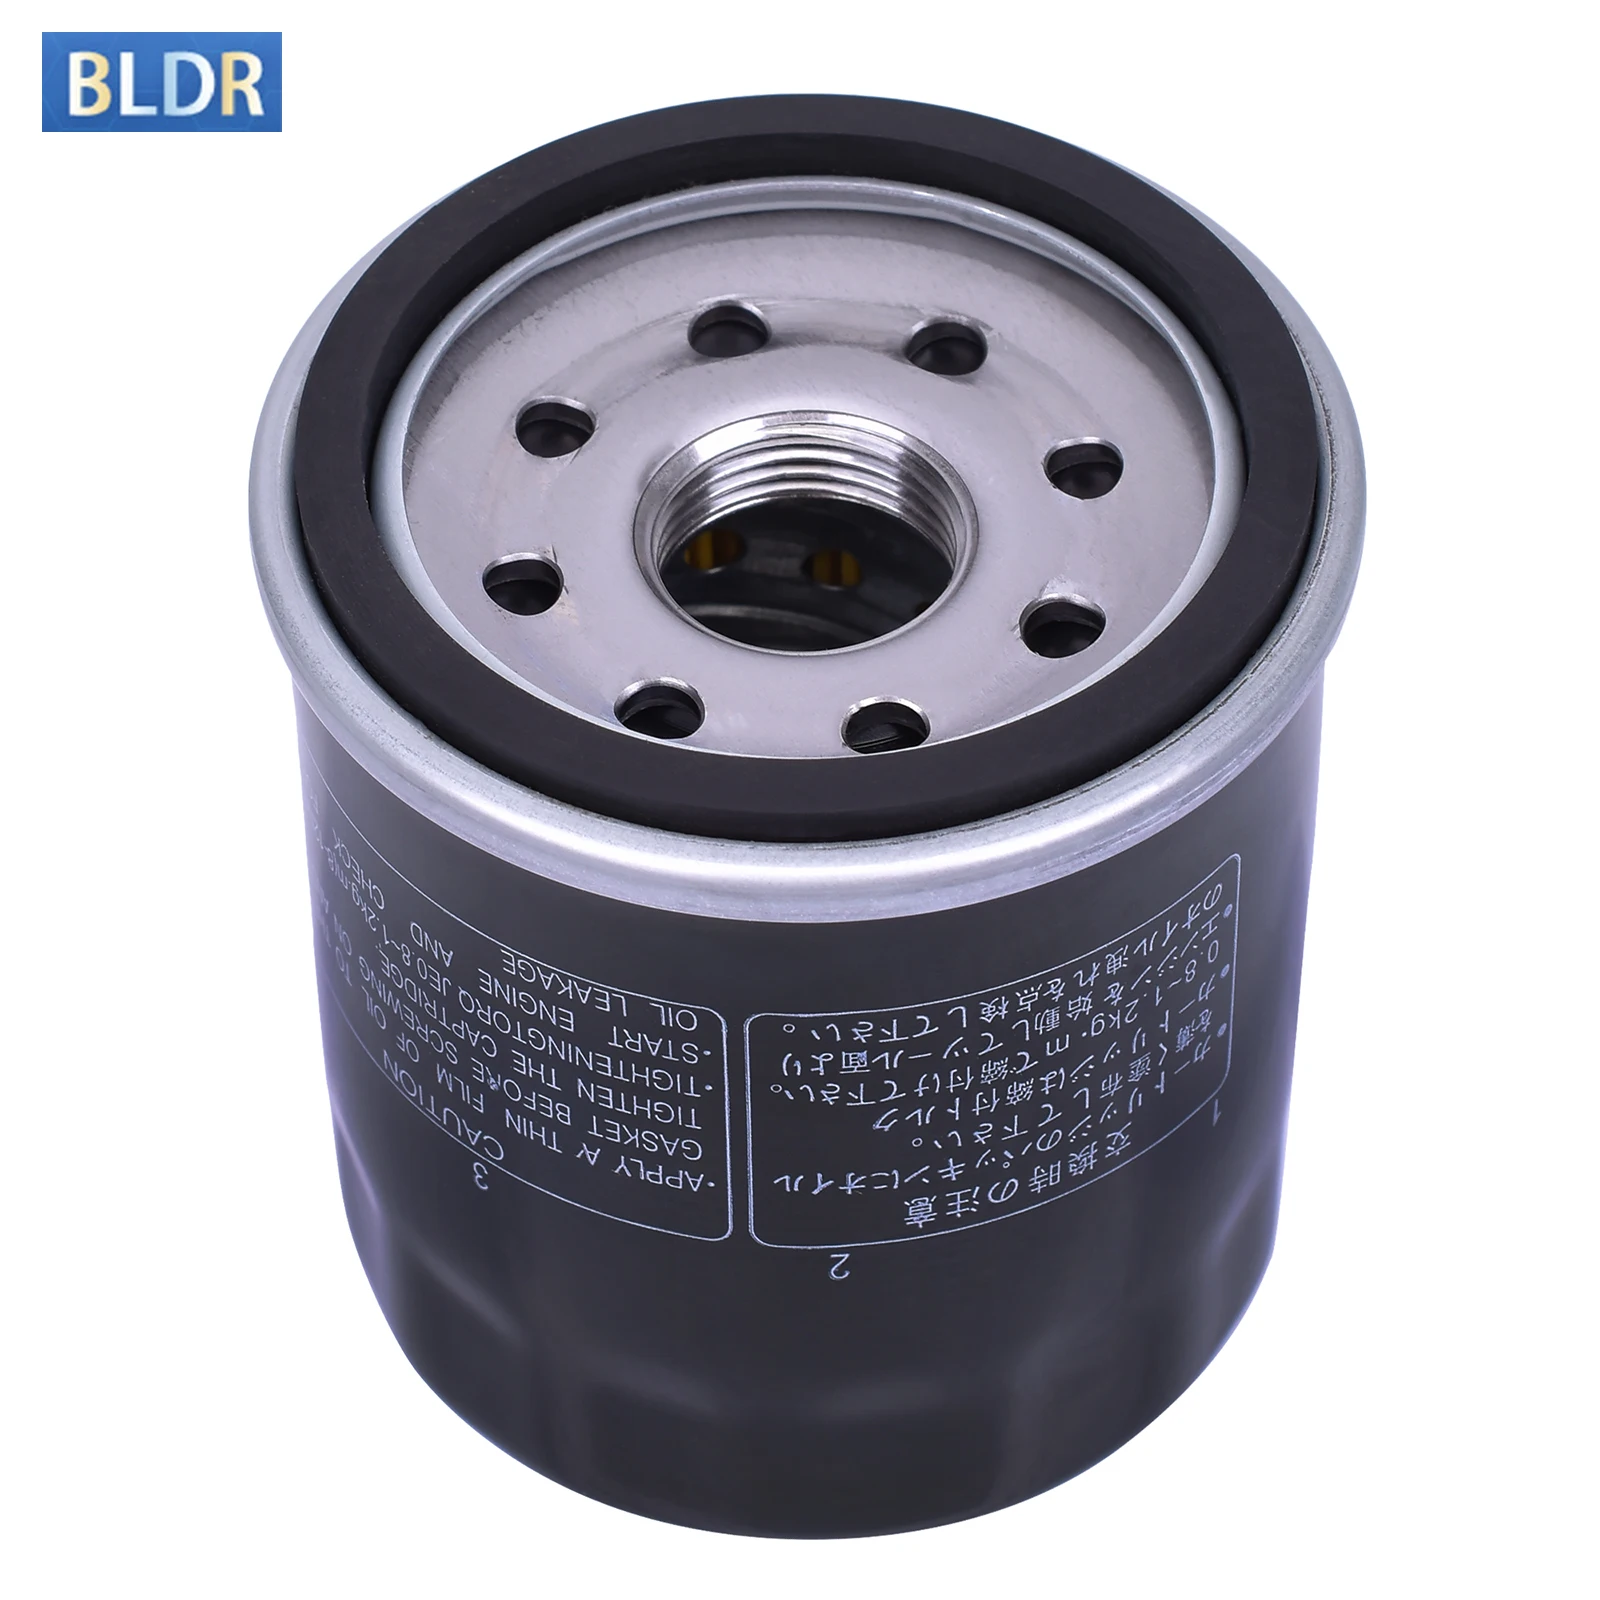 

Motorcycle Oil Filter For Honda CB400 F2N Super NC31 Four CB400F CB-1 CB1 CBR400 CBR400RR CB CBR 400 Tri-Arm NC23 Gull-Arm NC29